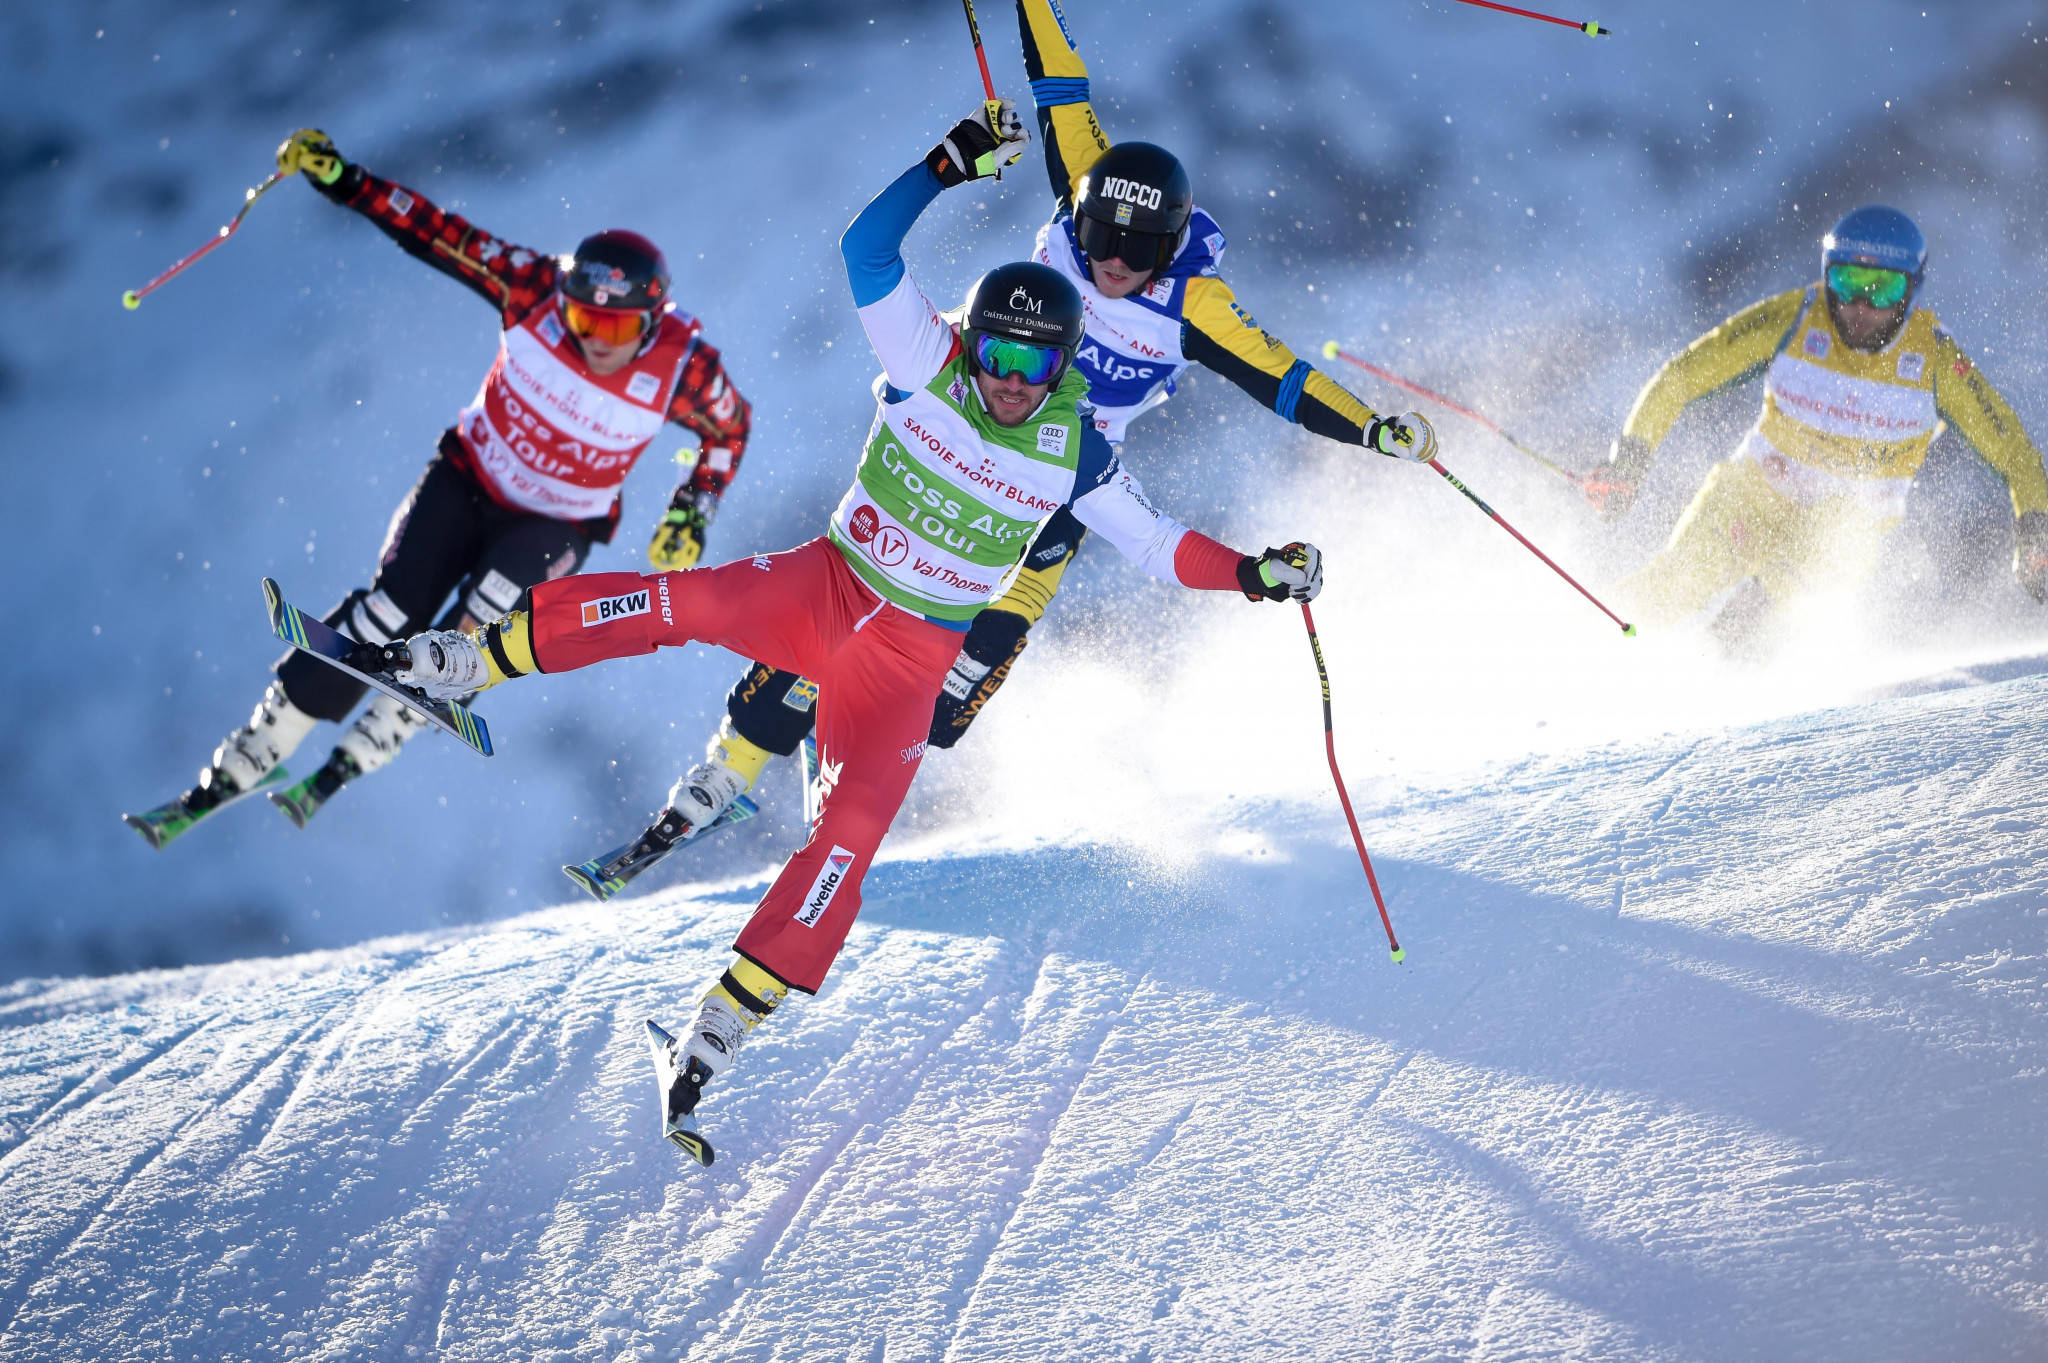 Joos Berry, centre, claimed gold today on the second day of Ski Cross World Cup racing in Innichen ©Getty Images